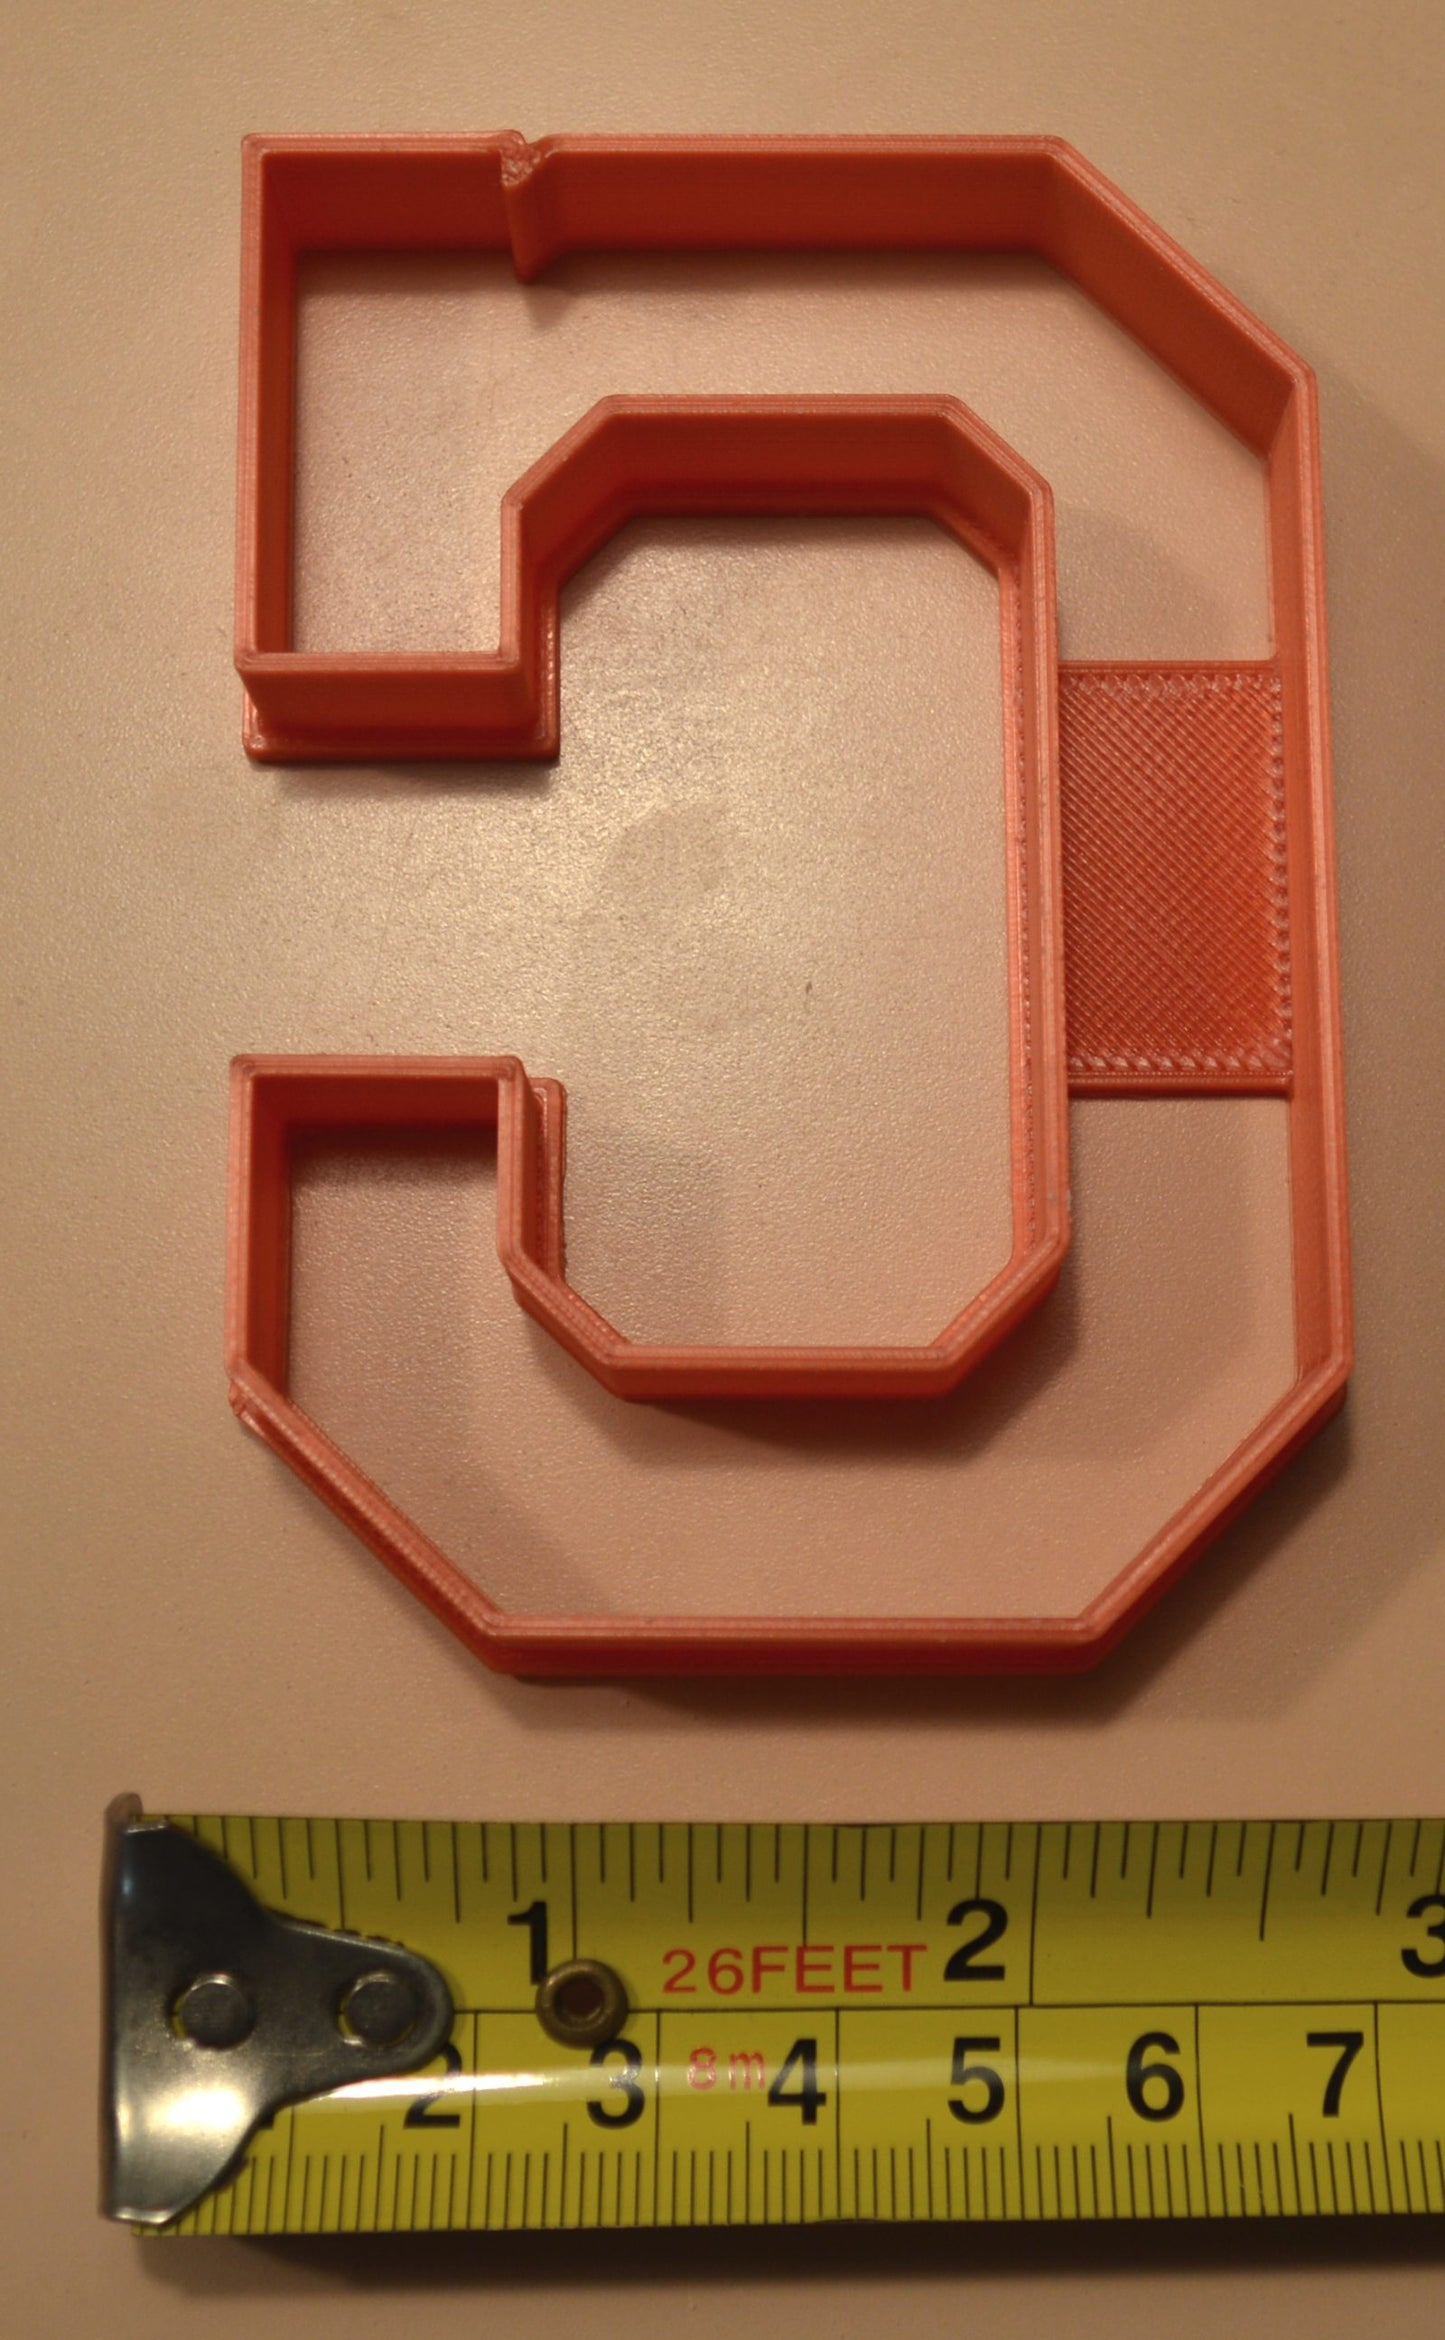 C Letter School Pride Athletics Cookie Cutter Made in USA PR2569